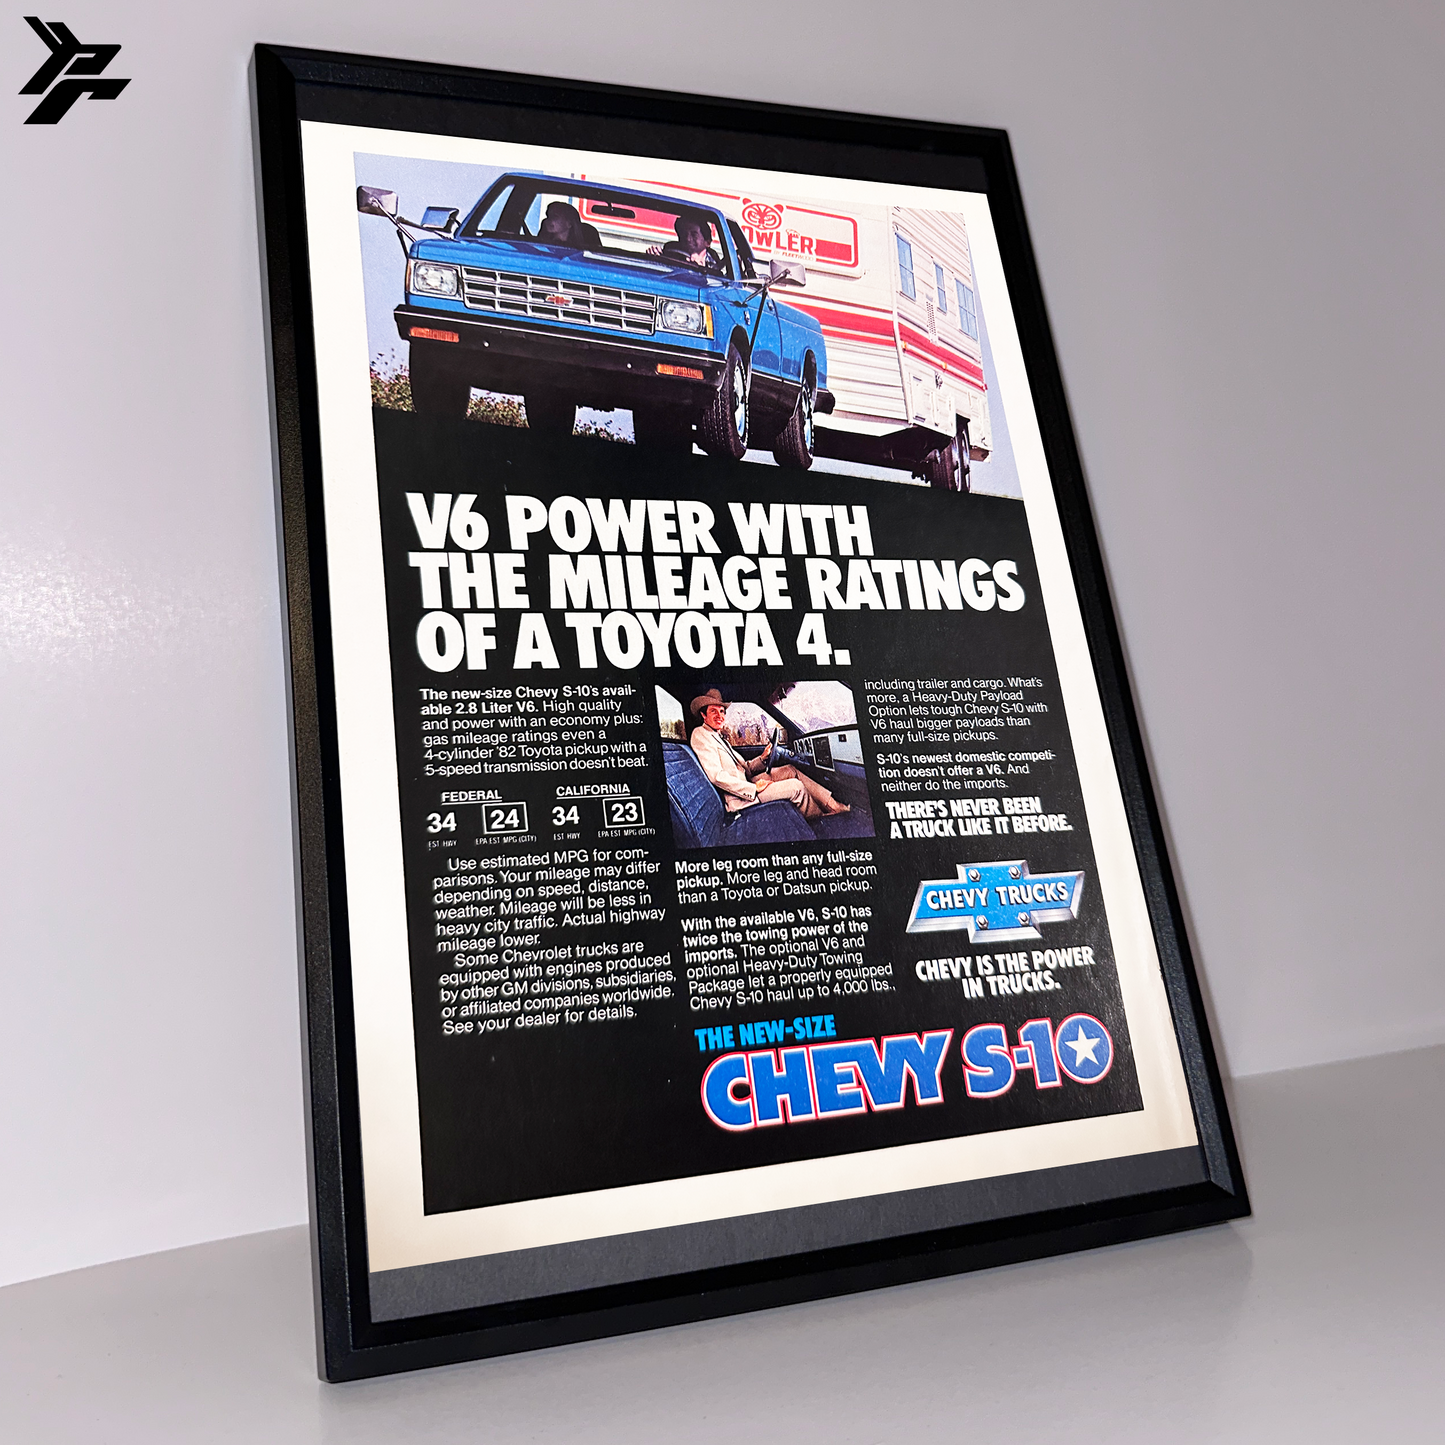 Chevy S10 power framed ad